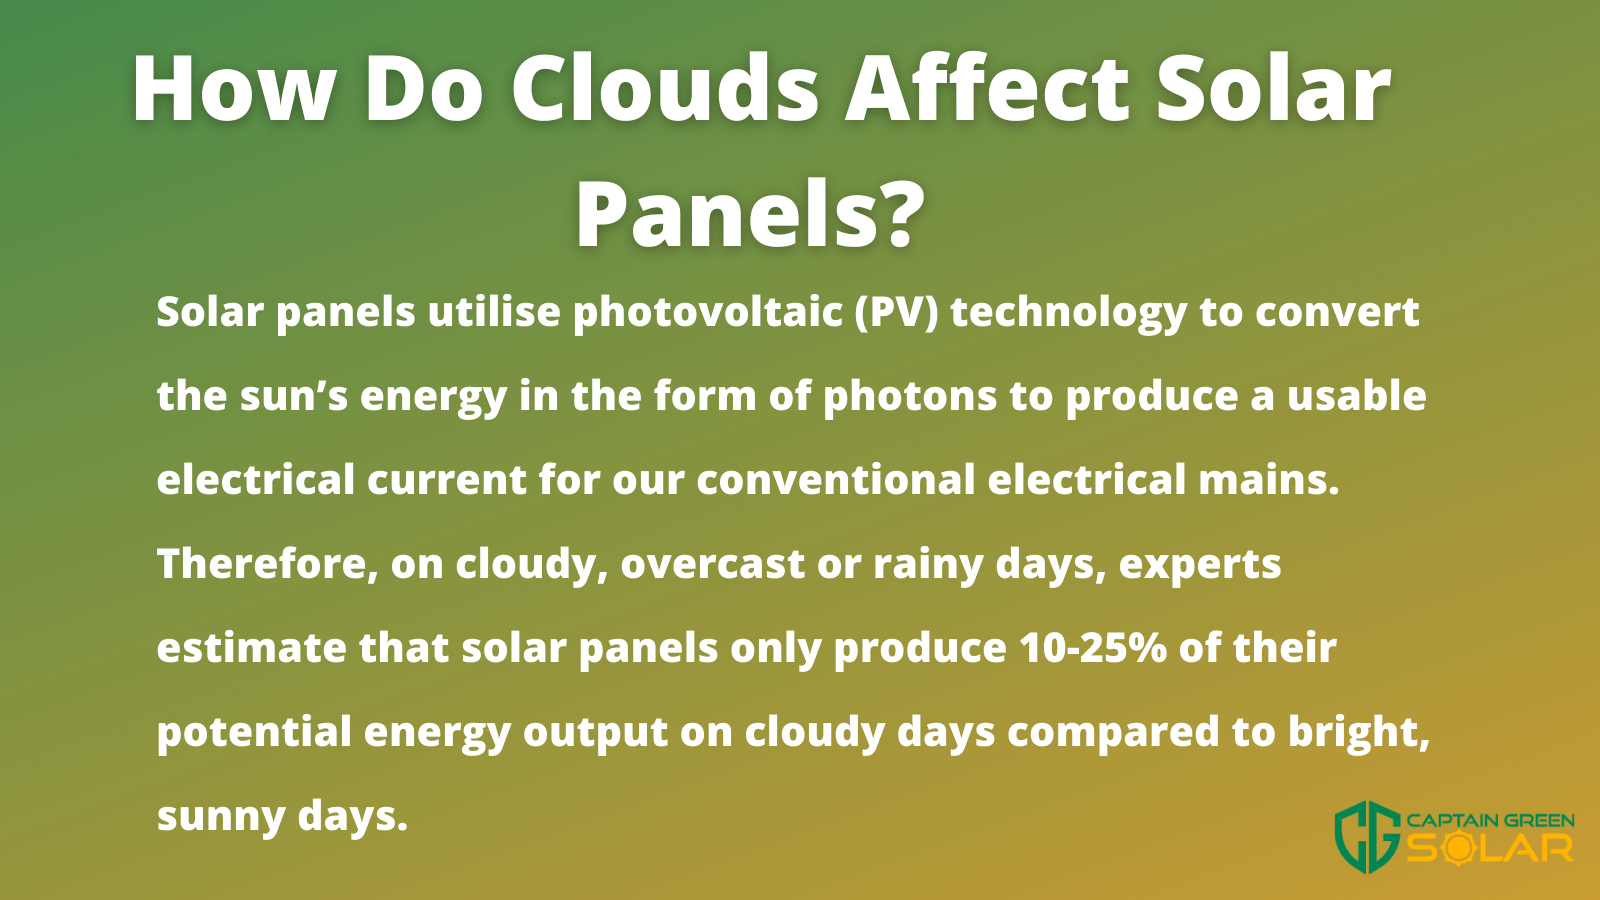 How do clouds affect solar panels